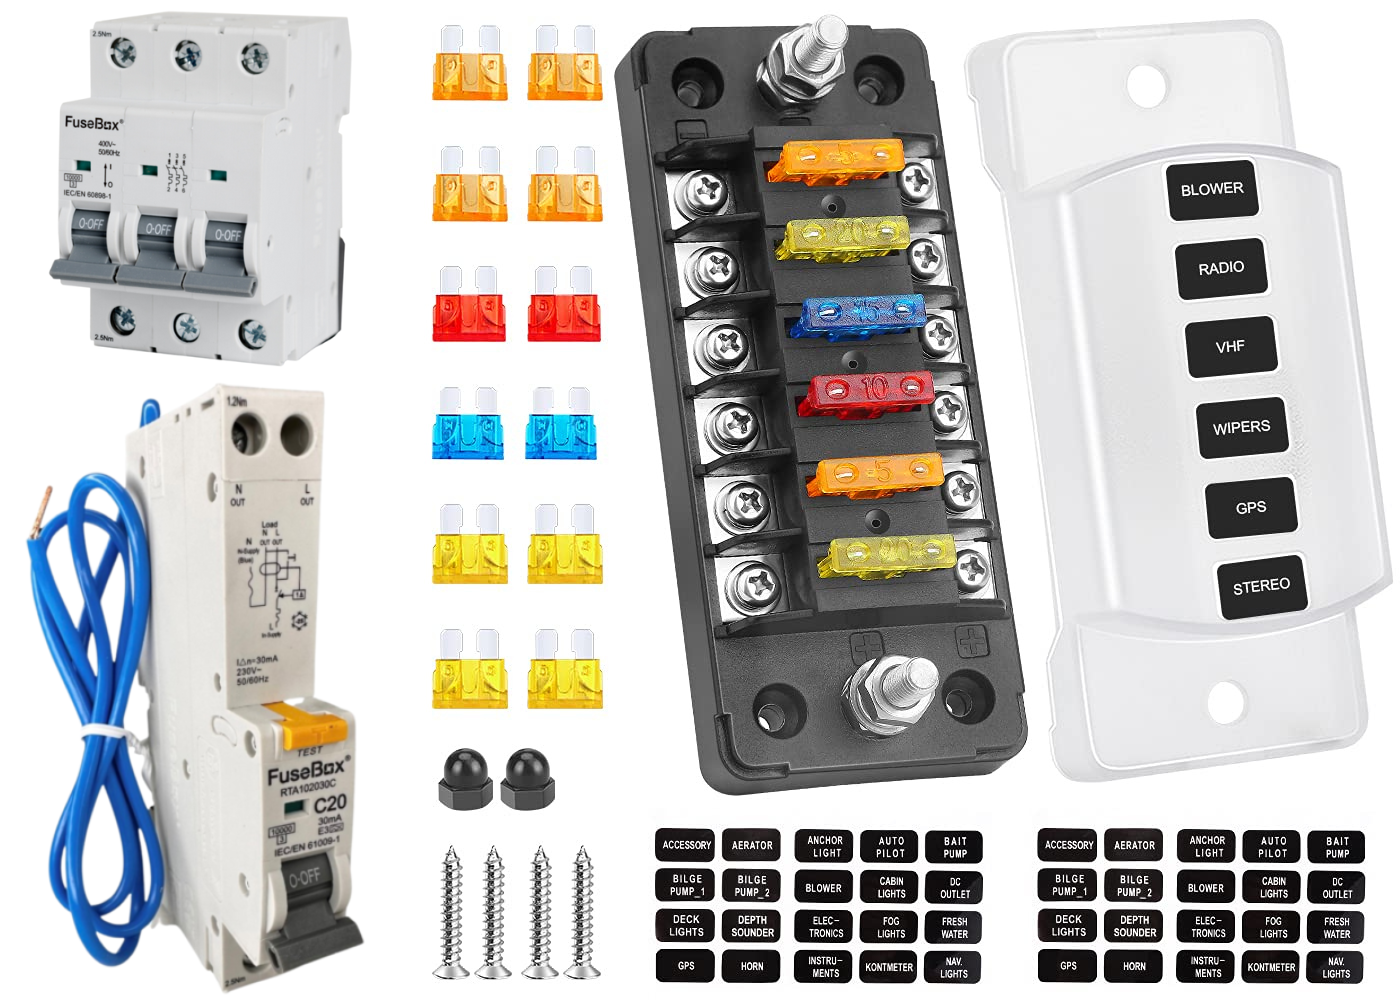 Why Upgrade Your Fuse Box?